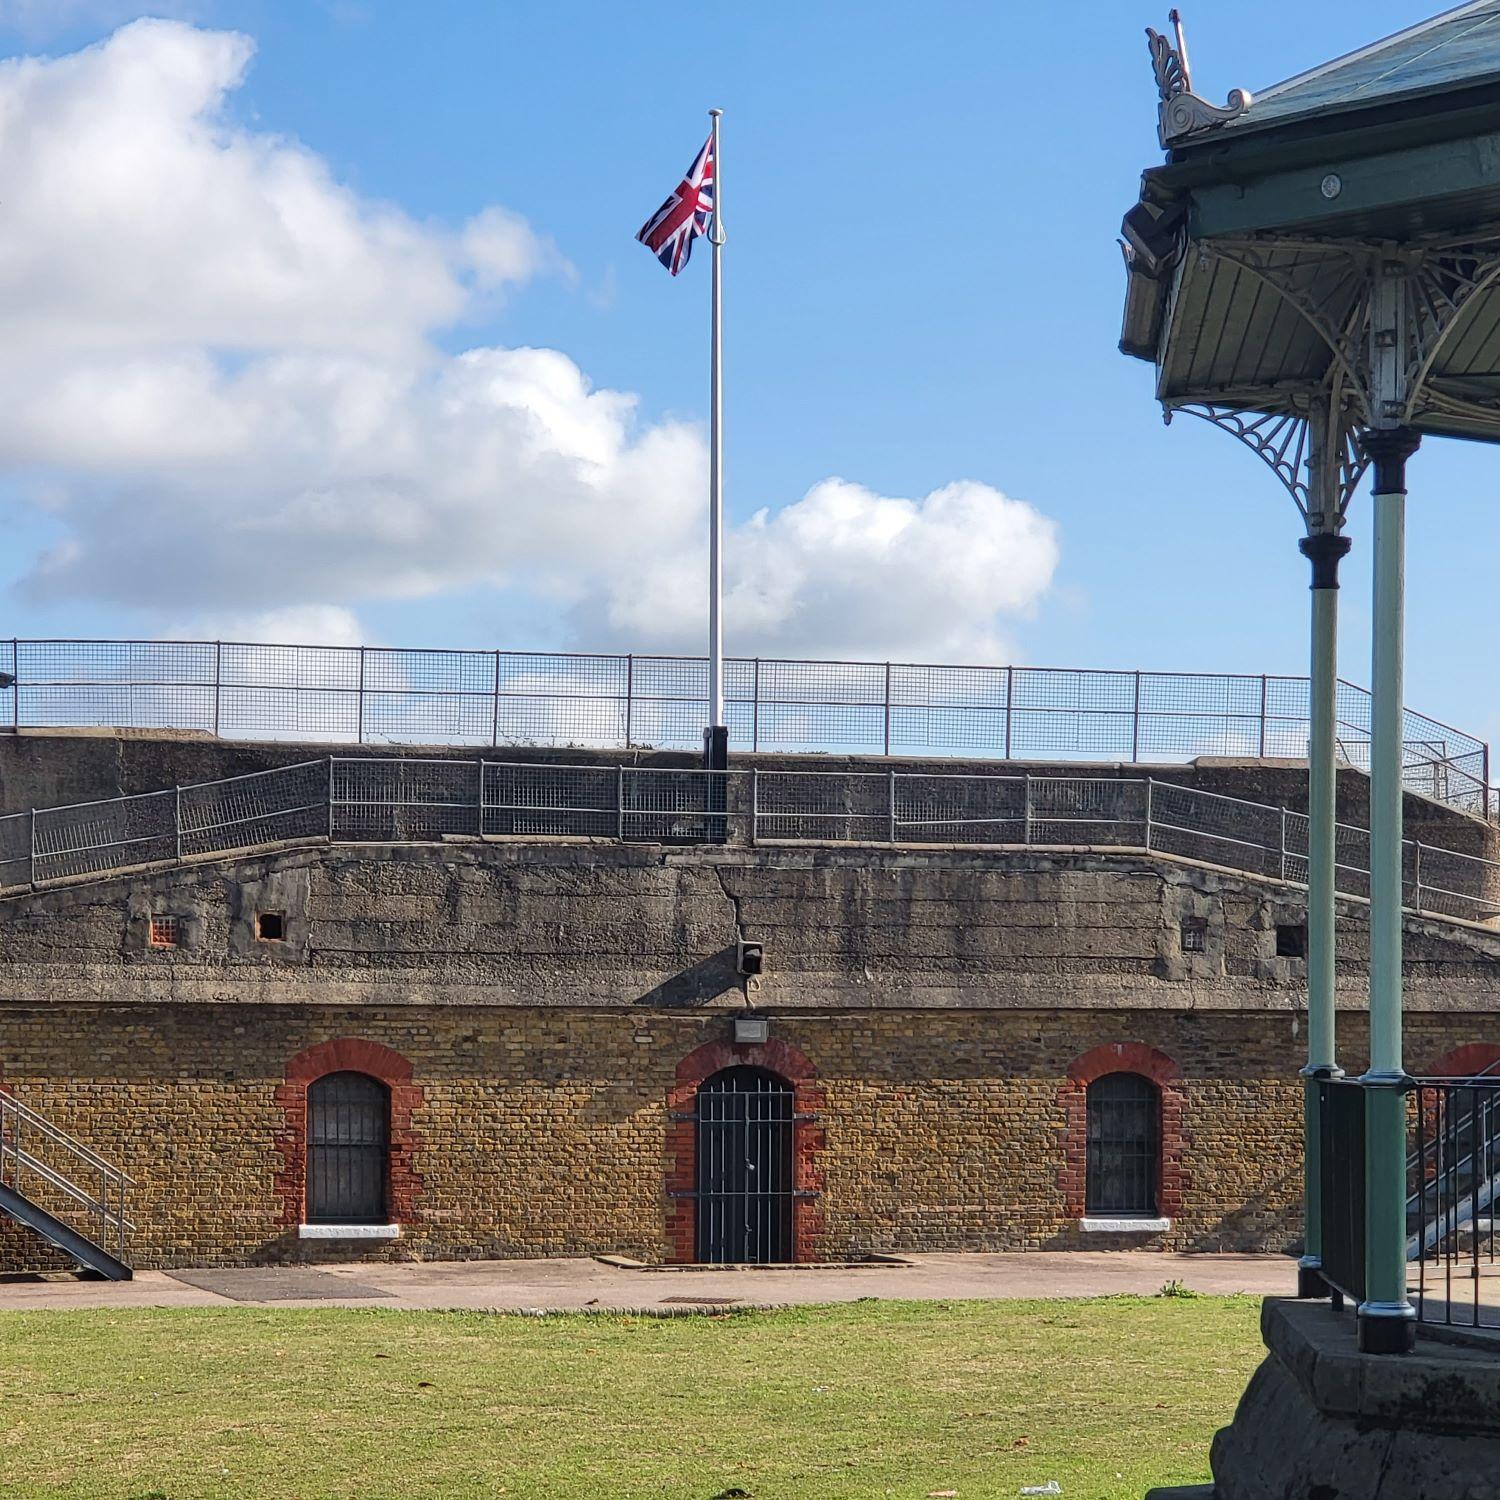 Union flag flying at New Tavern Fort.